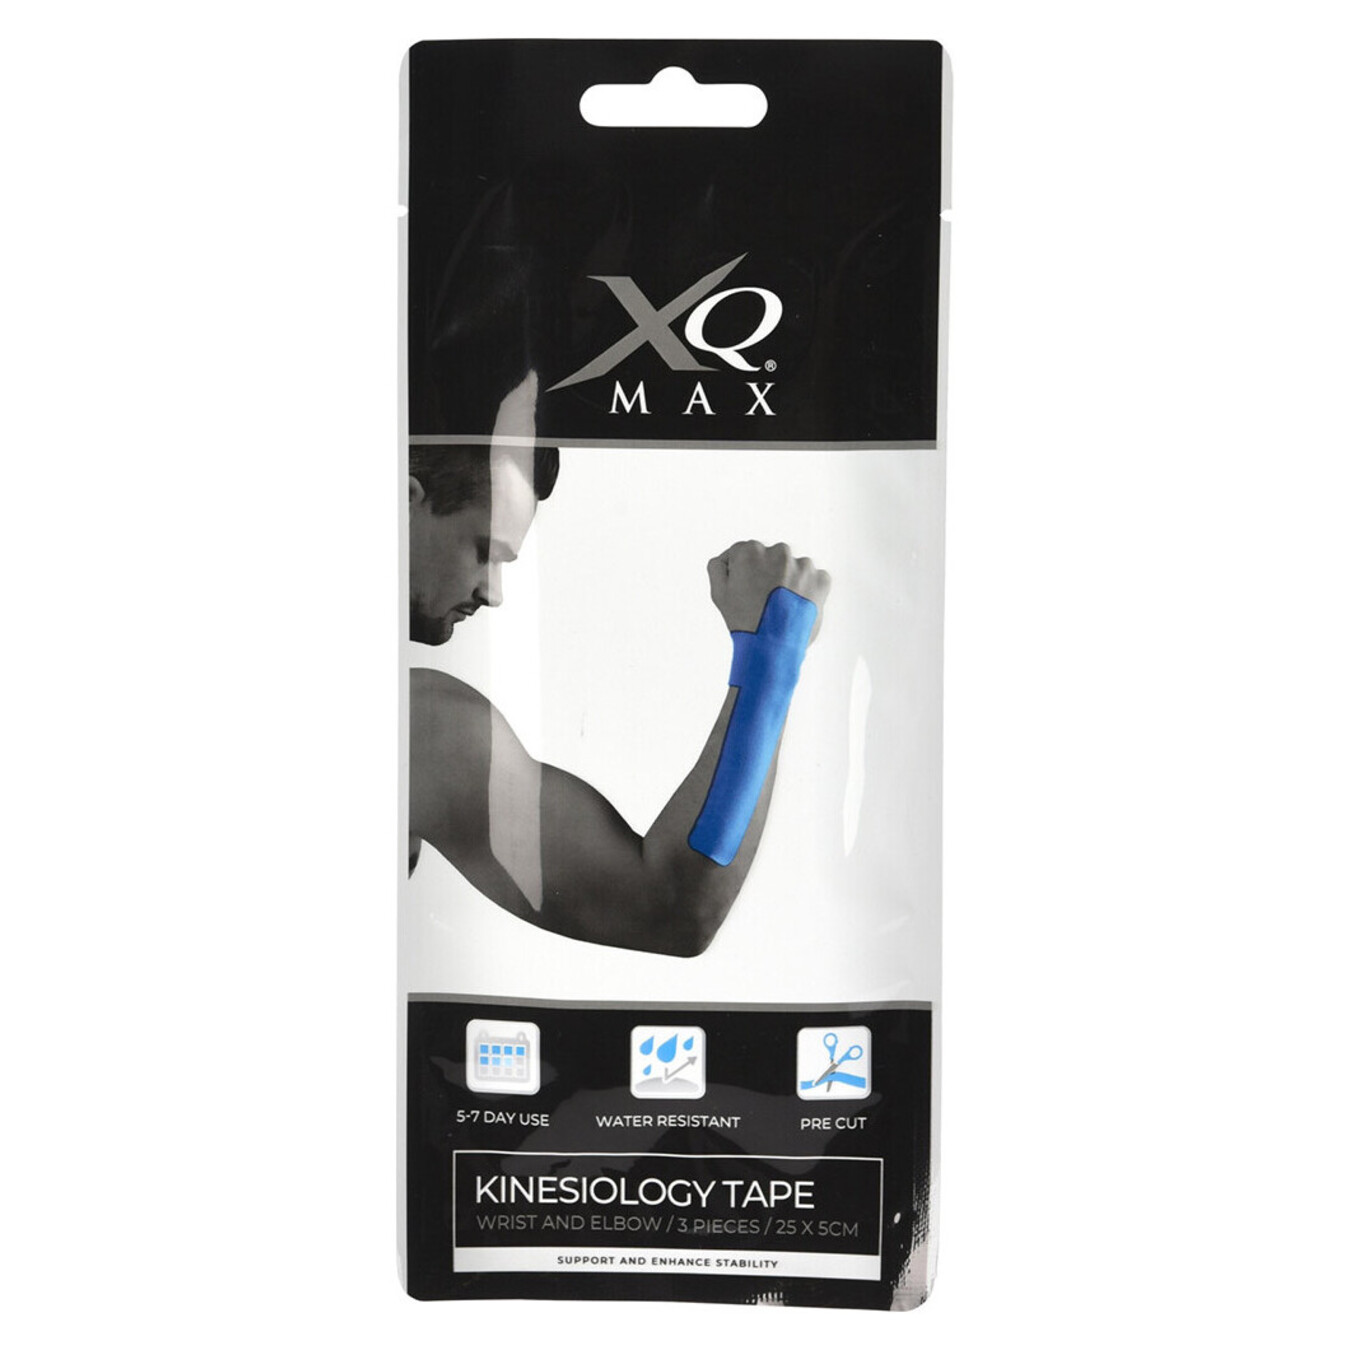 A set of Koopman kinesiology tapes for elbow and wrist 25*5 cm